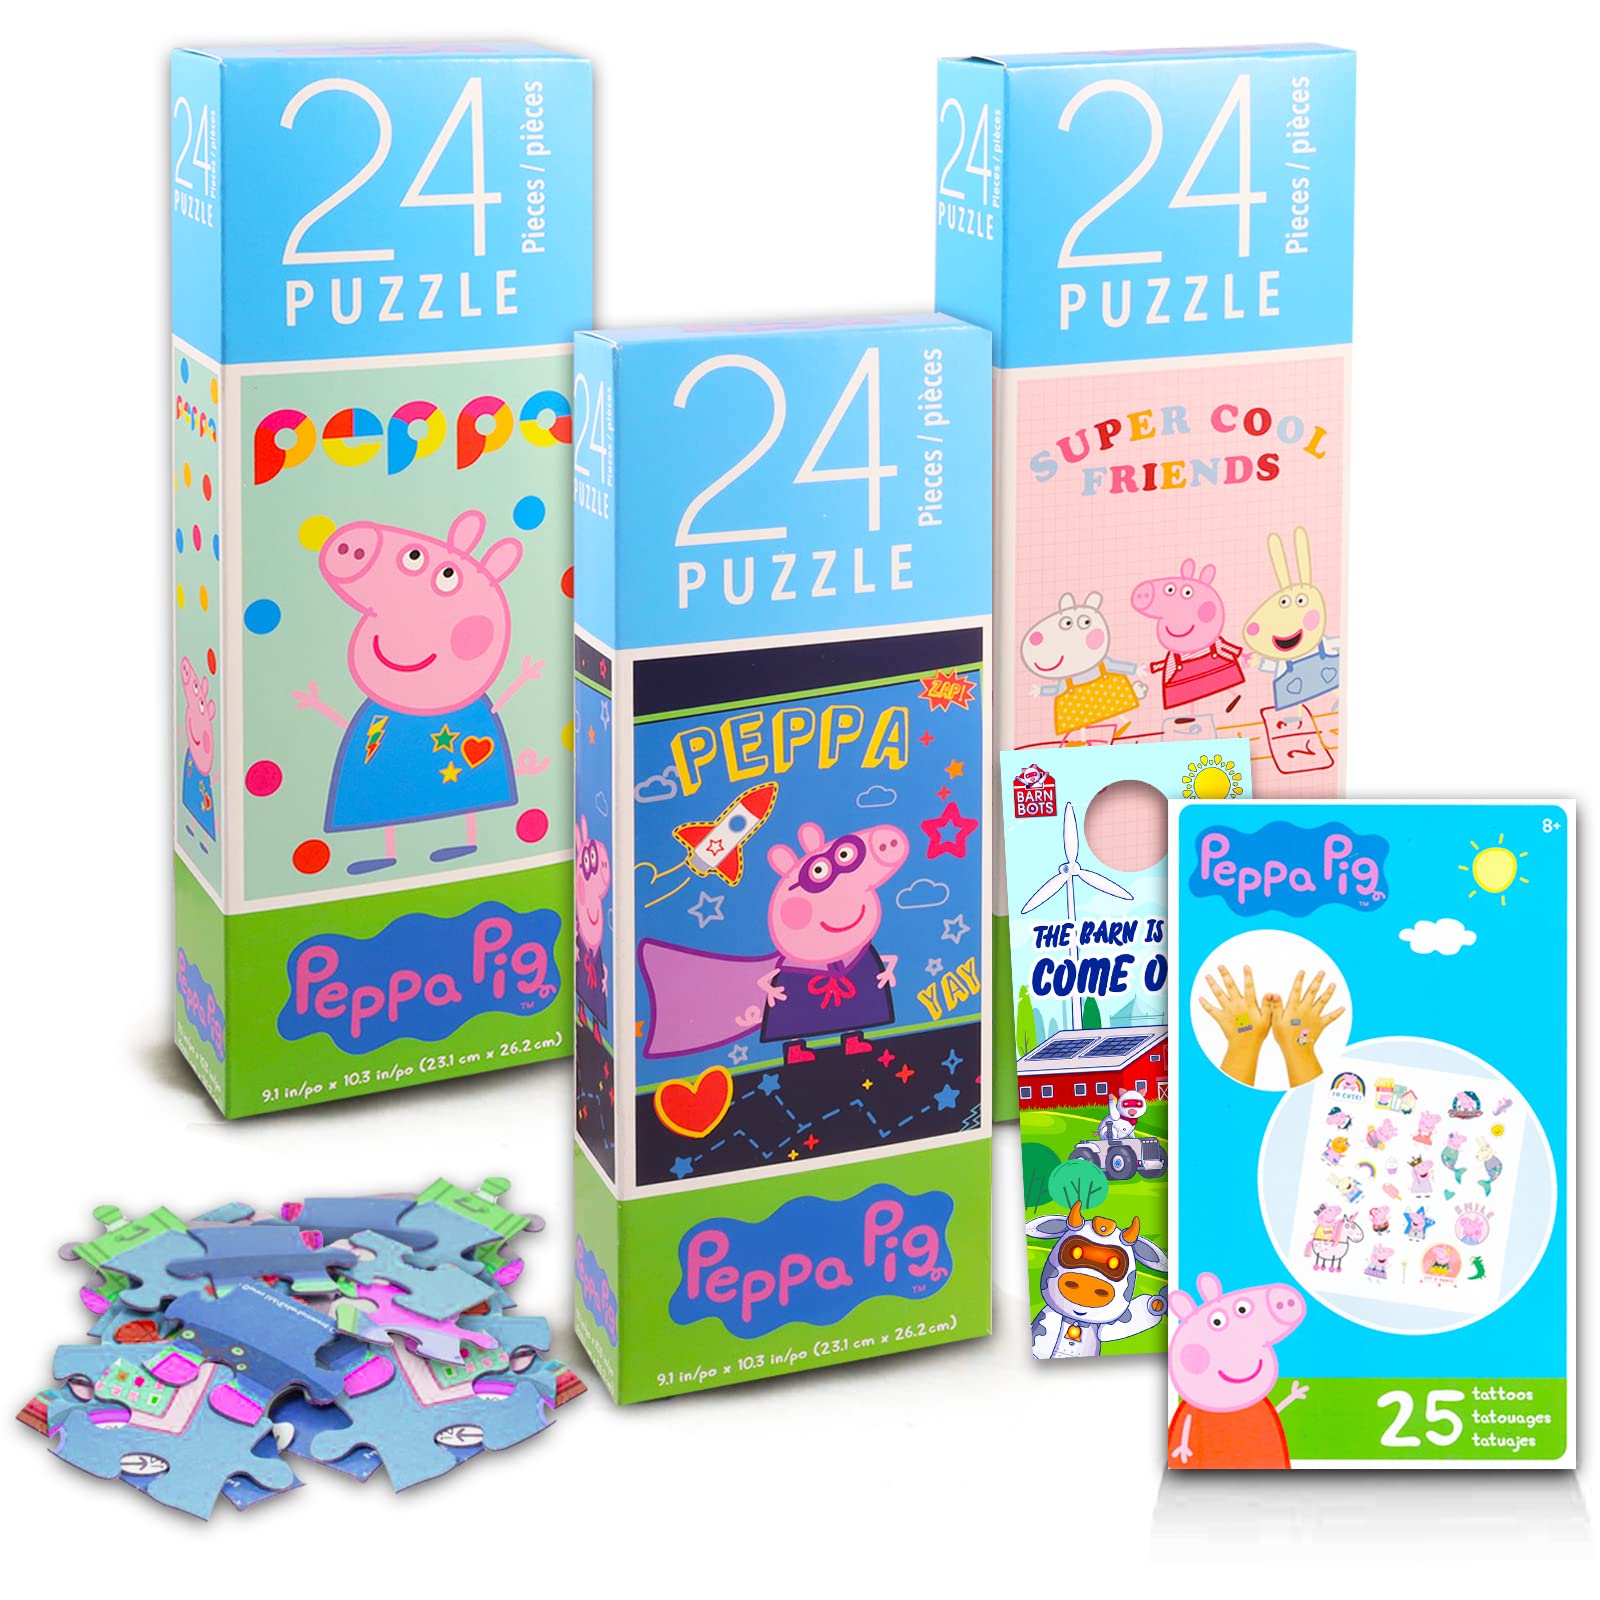 Peppa Pig Store Peppa Pig Jigsaw Puzzle Assortment for Boys, girls - Bundle with 3 Peppa Pig 24 Piece Puzzles Plus Peppa Pig Tem